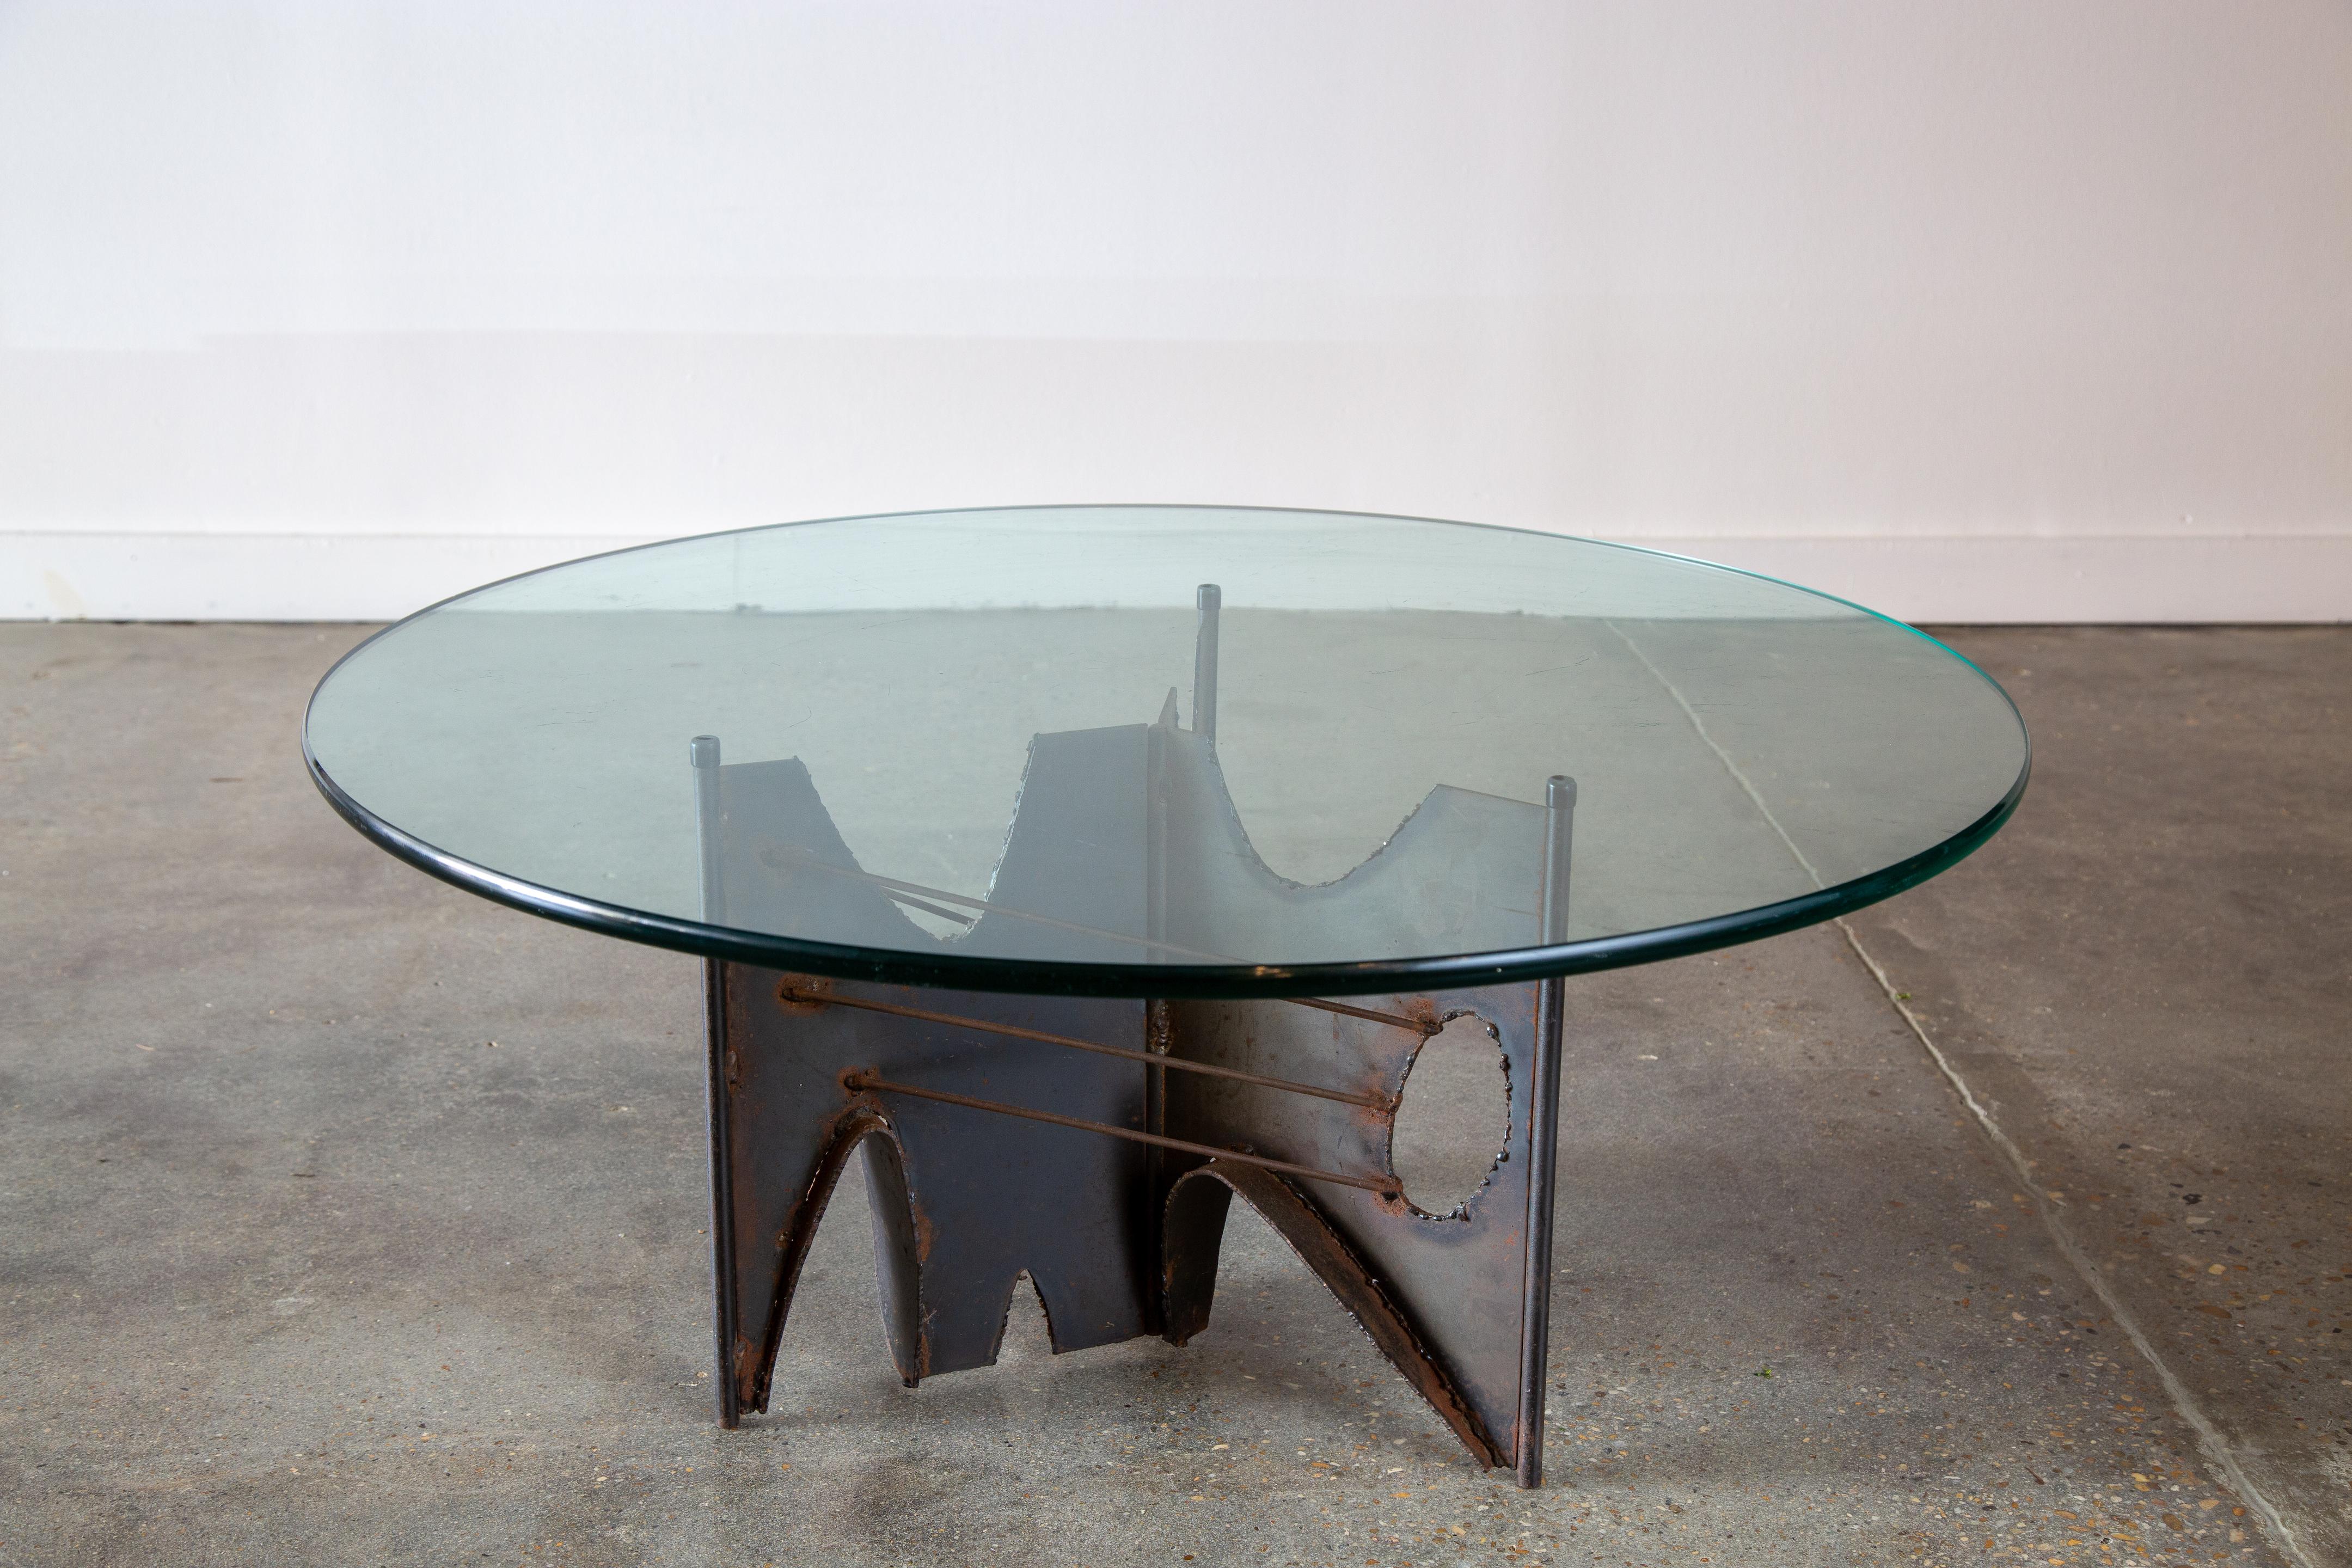 A vintage coffee table with a welded steel base and a glass top. Designed by Laurel’s primary designer’s Harold Weiss and Richard Barr with odes to Paul Evans welded brutalist designs.  This is a unique offering as we have only seen lamp bases with